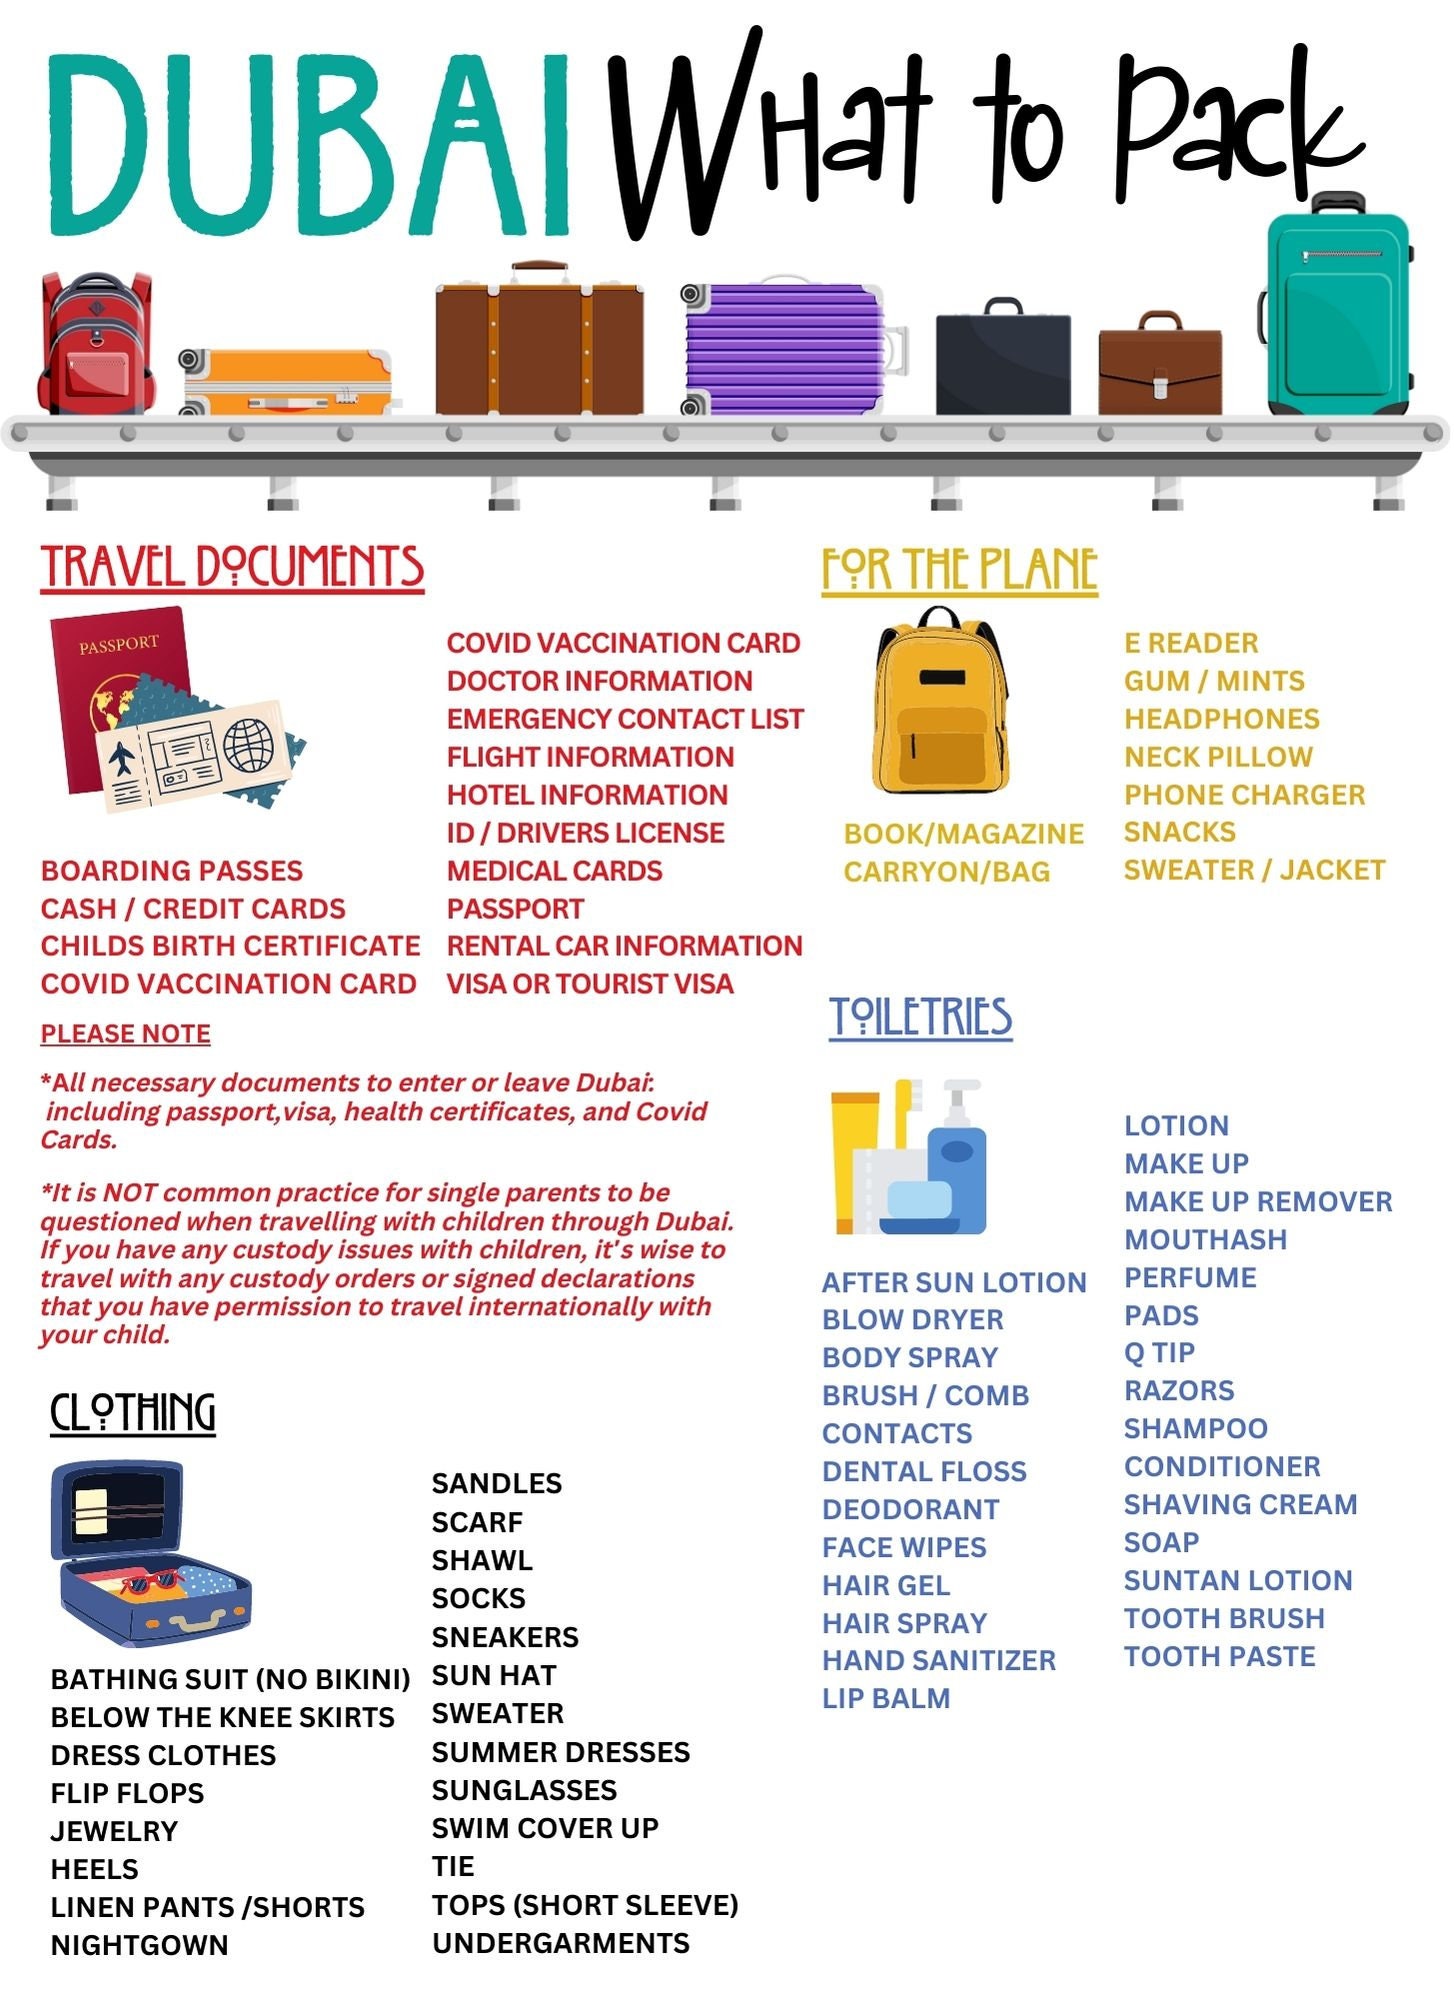 What to Pack List, Dubai UAE Packing Checklist, Editable in Canva